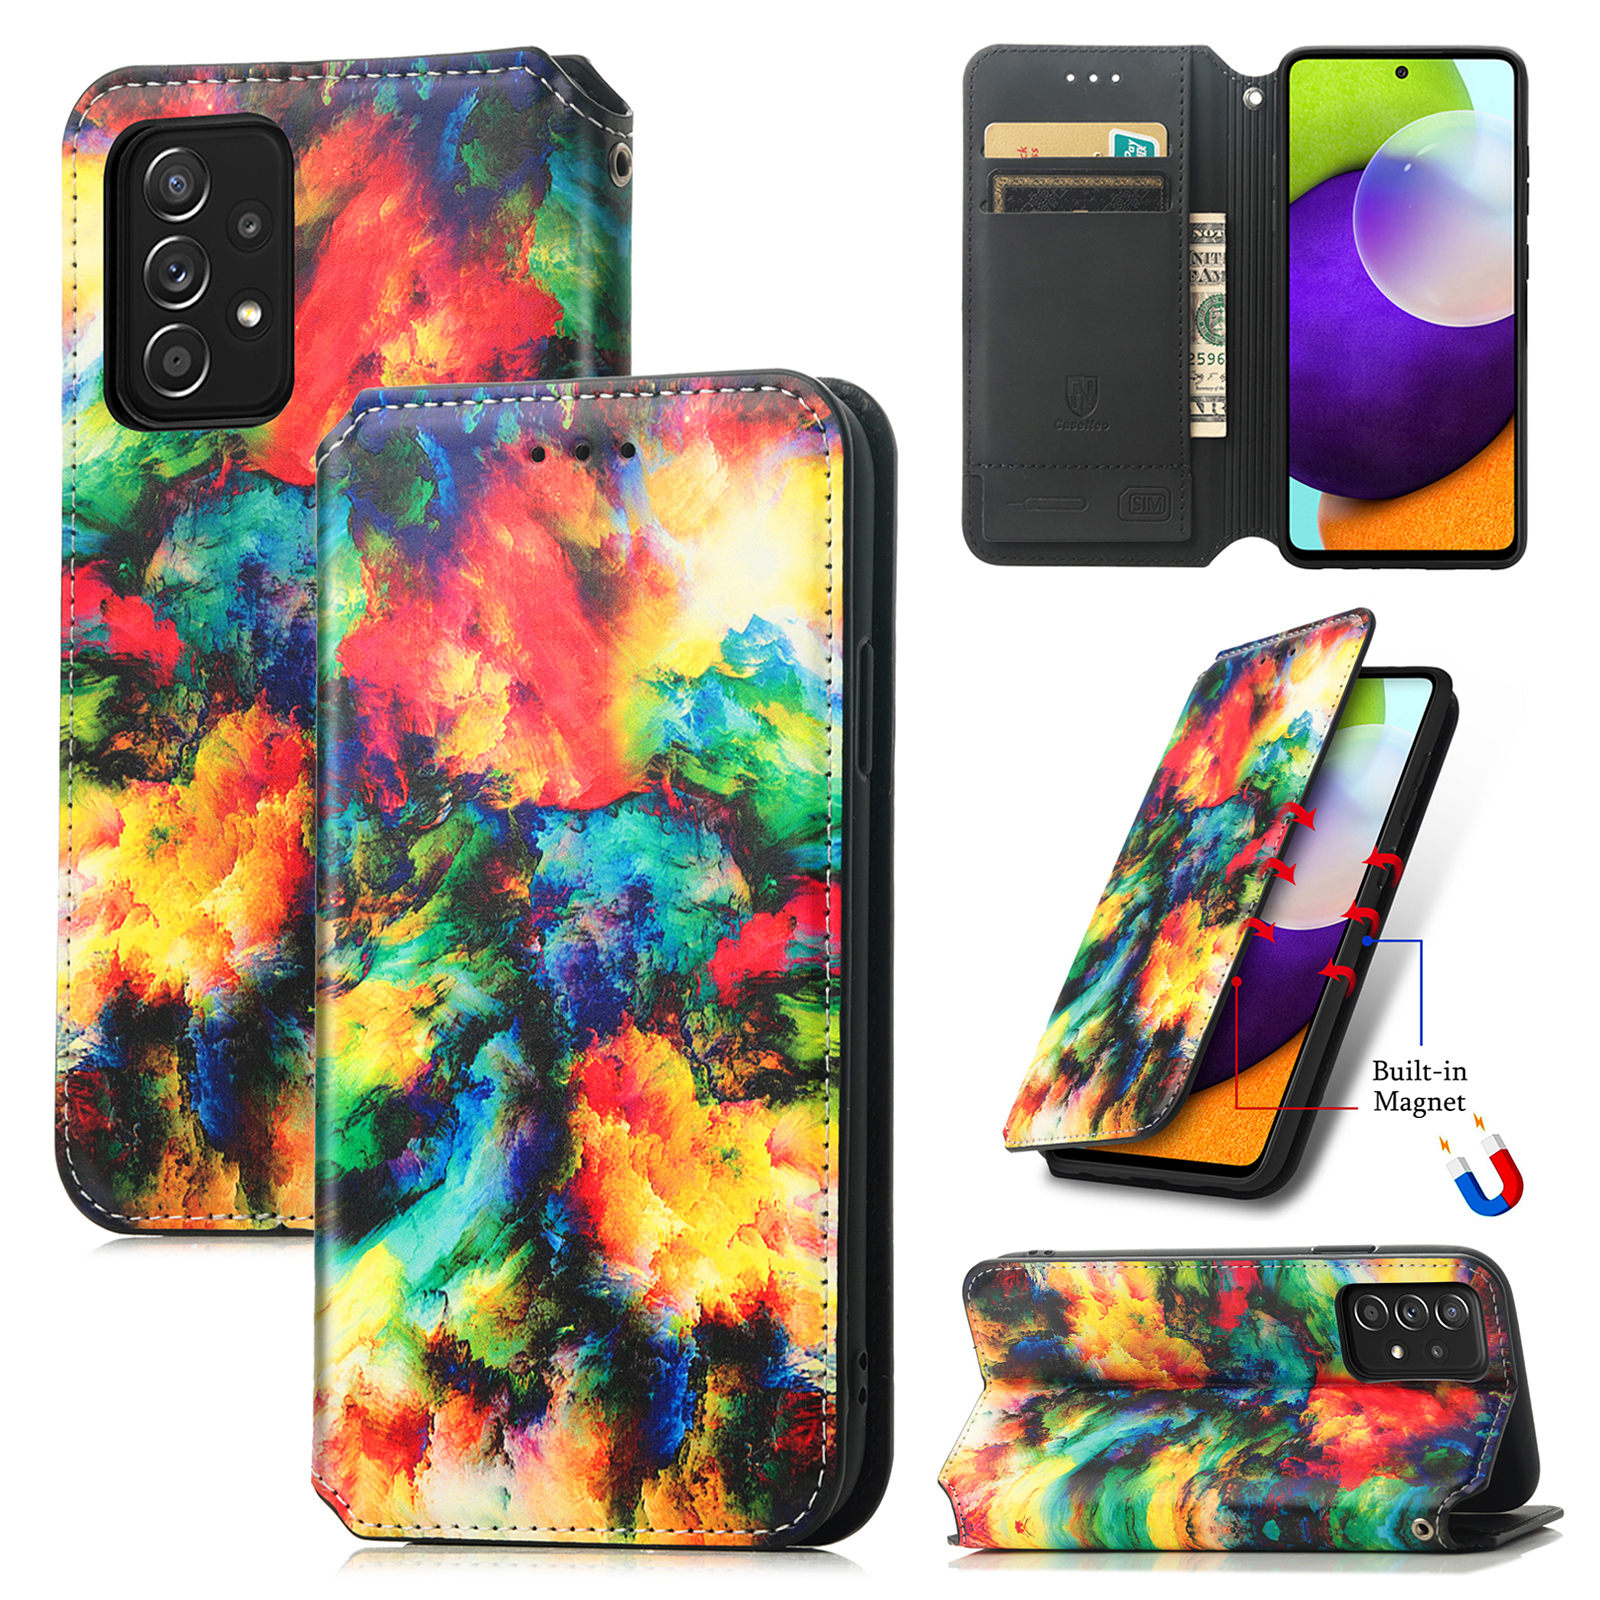 Case for Samsung Galaxy S21 Case, Galaxy S21 Case Wallet Case PU Leather and Hard PC RFID Blocking Slim Durable Protective Phone Case Cover For Samsung Galaxy S21,Painting - image 1 of 9